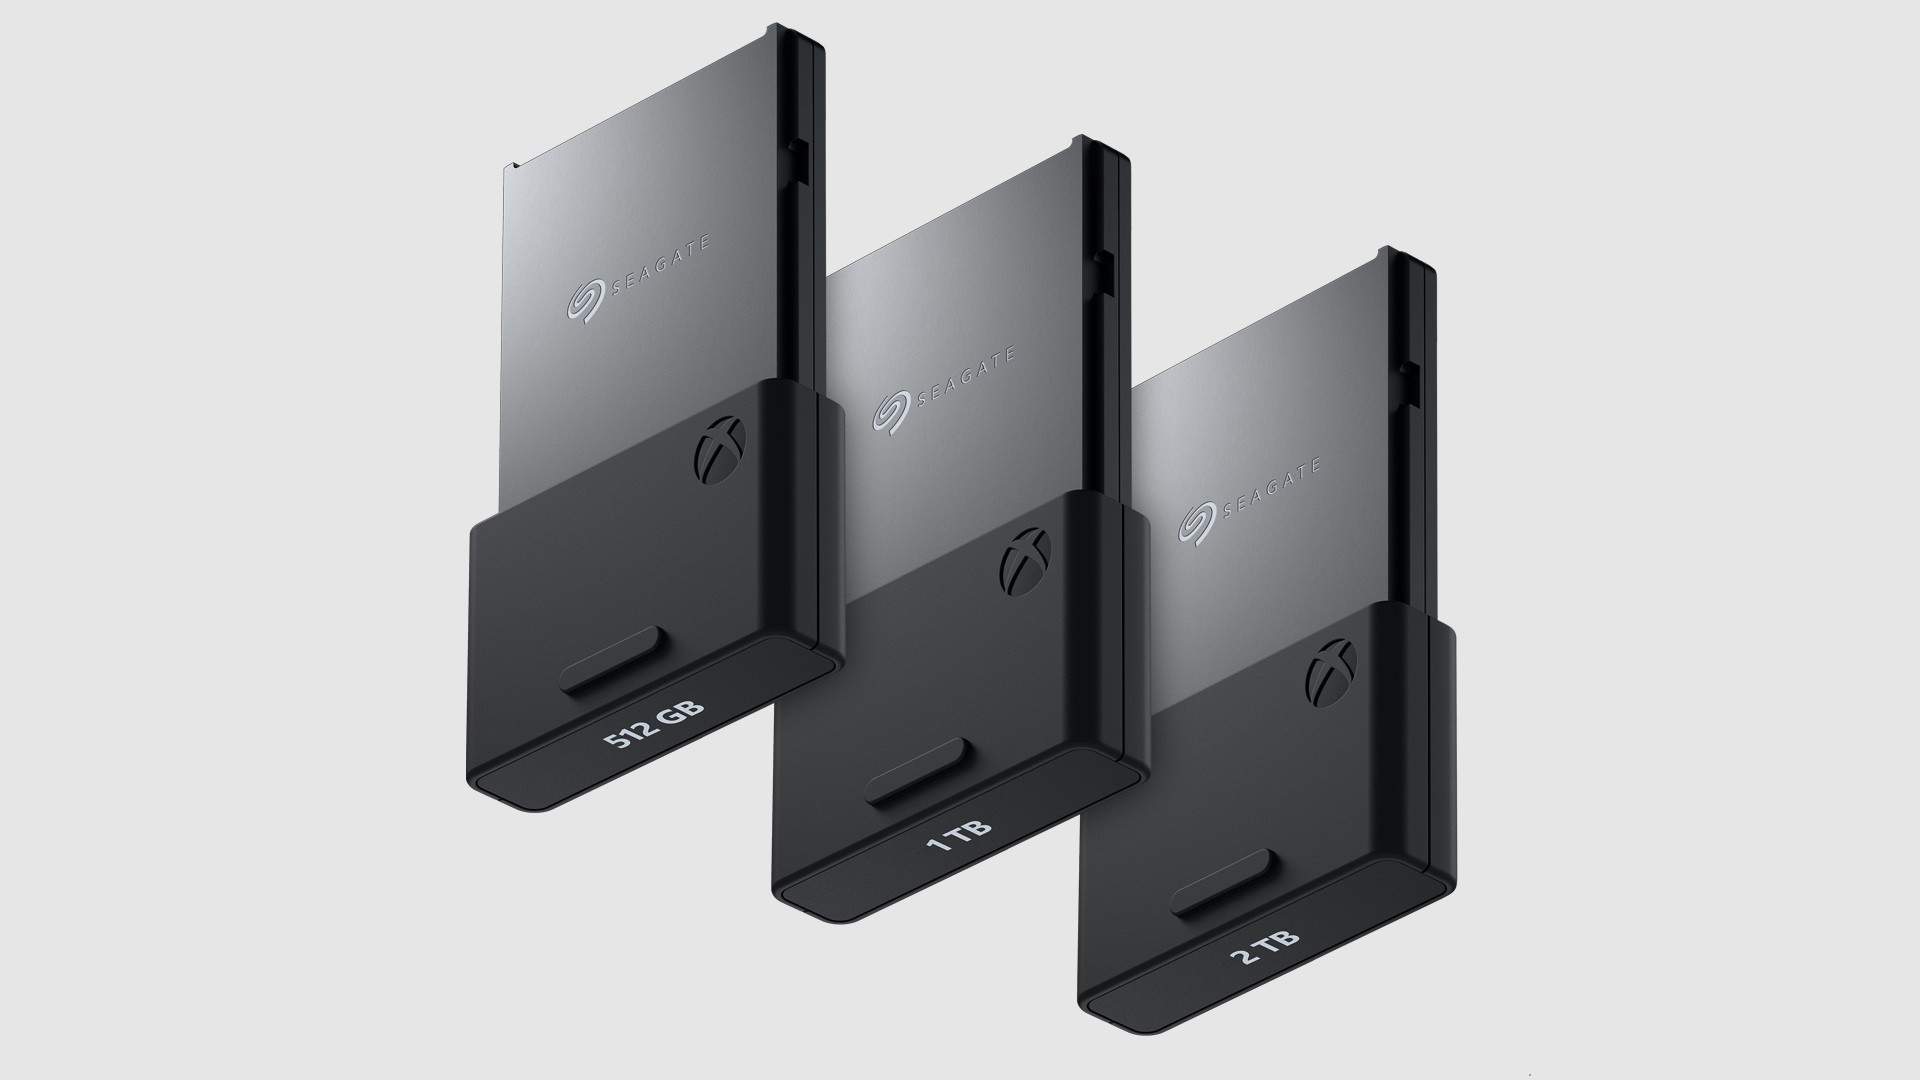 Seagate storage cards - 512 GB, 1 TB and 2 TB models shown in order of size